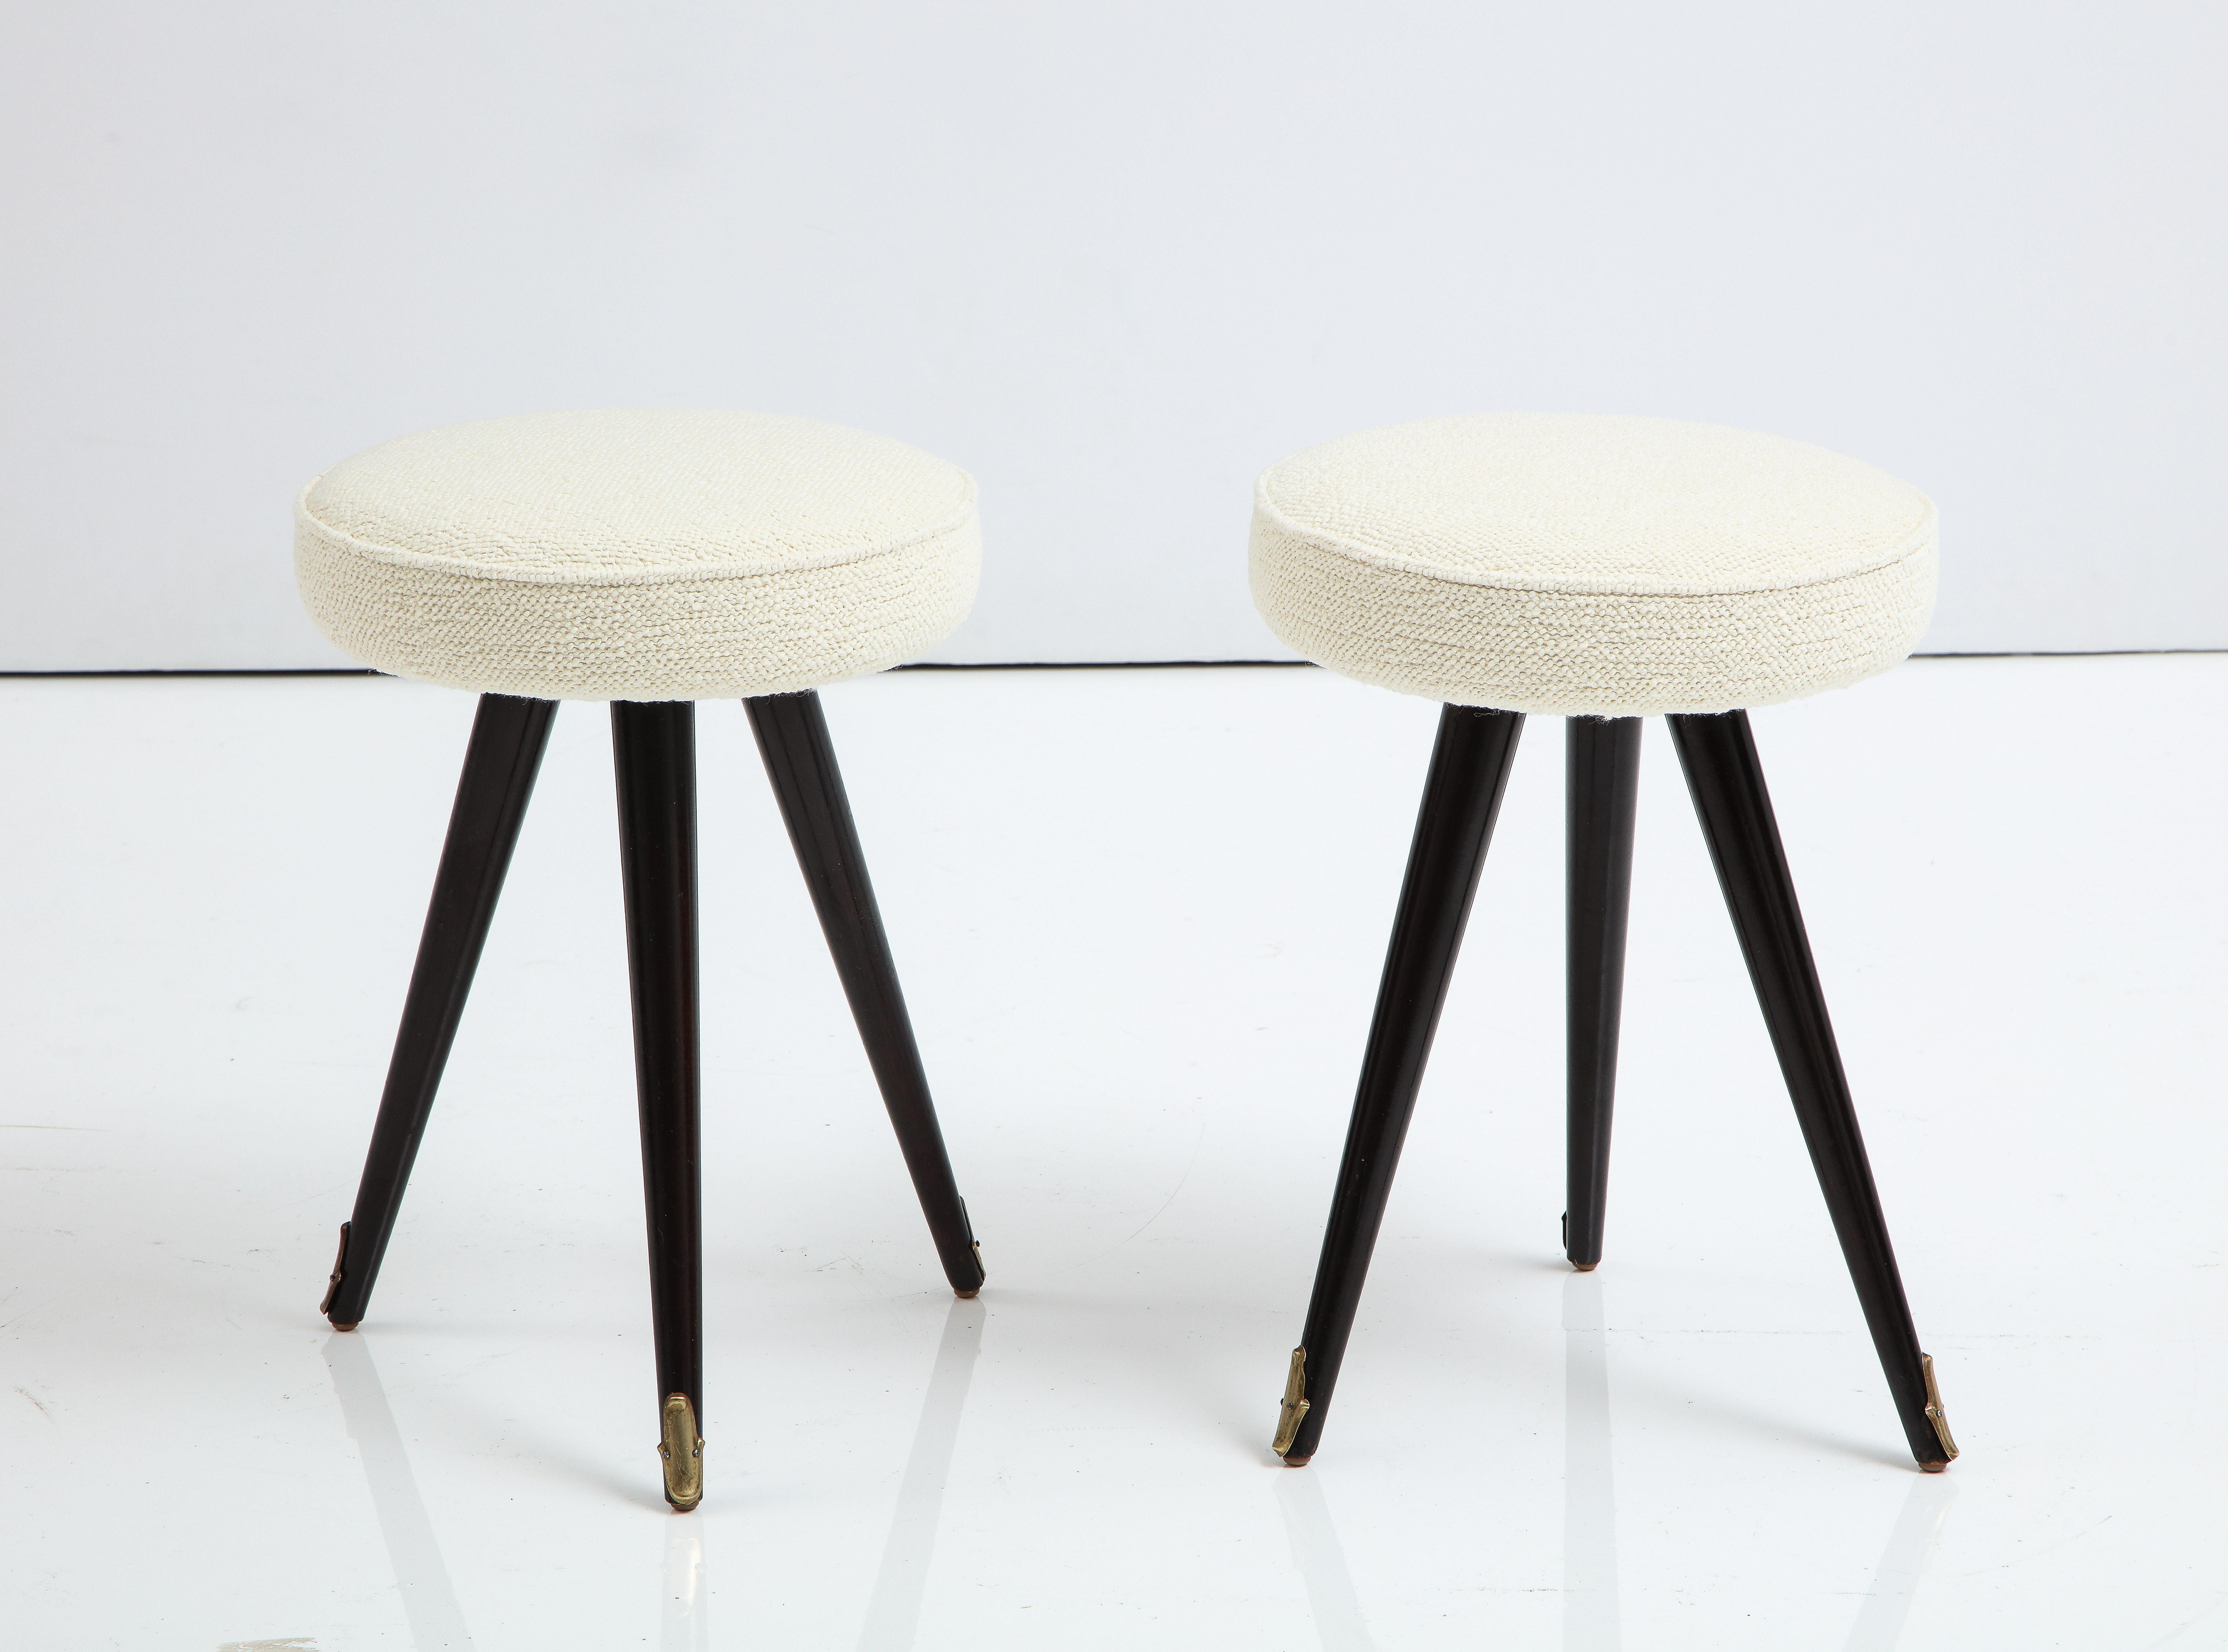 Pair of very unique Northern Italian petite stools, the tripod legs are ebonized wood, ending in elegantly shaped brass sabot. The circular seats are newly upholstered in a Belgian wool and cotton creamy textured fabric. 
Northern Italy, circa late